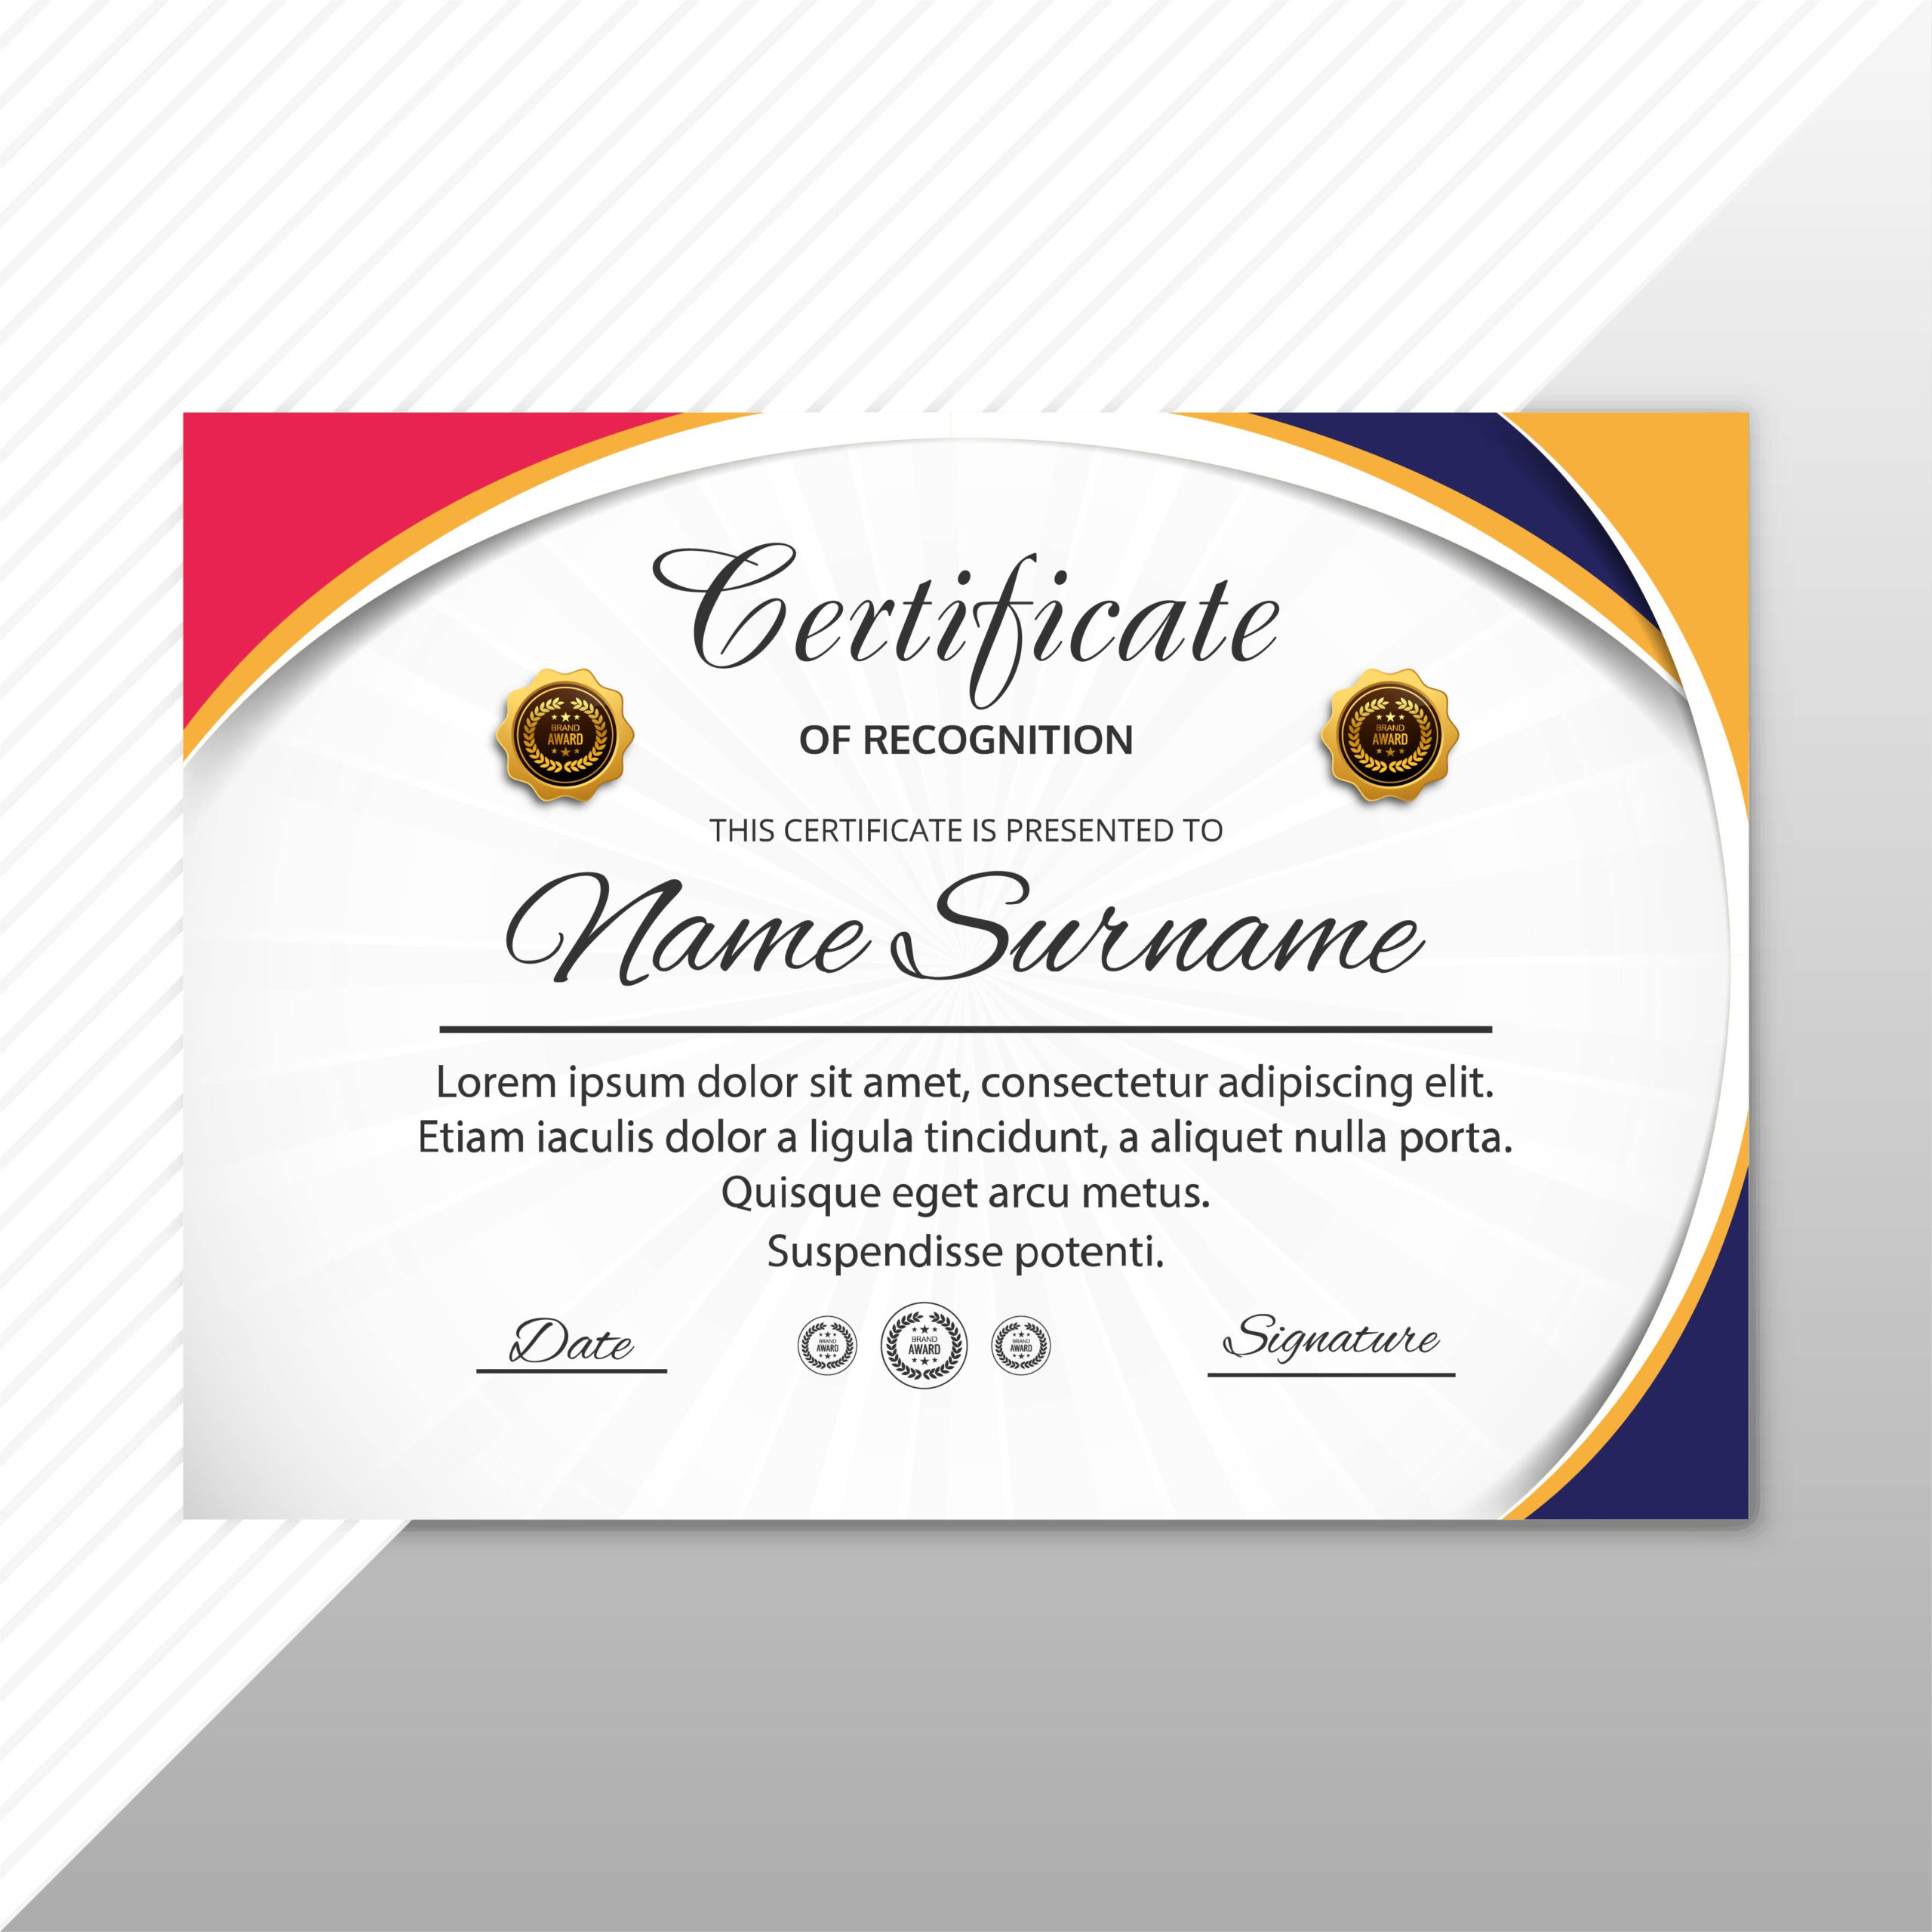 9 Printable Certificate Designs | Certificate Template Intended For Fantastic Free Choir Certificate Templates 2020 Designs